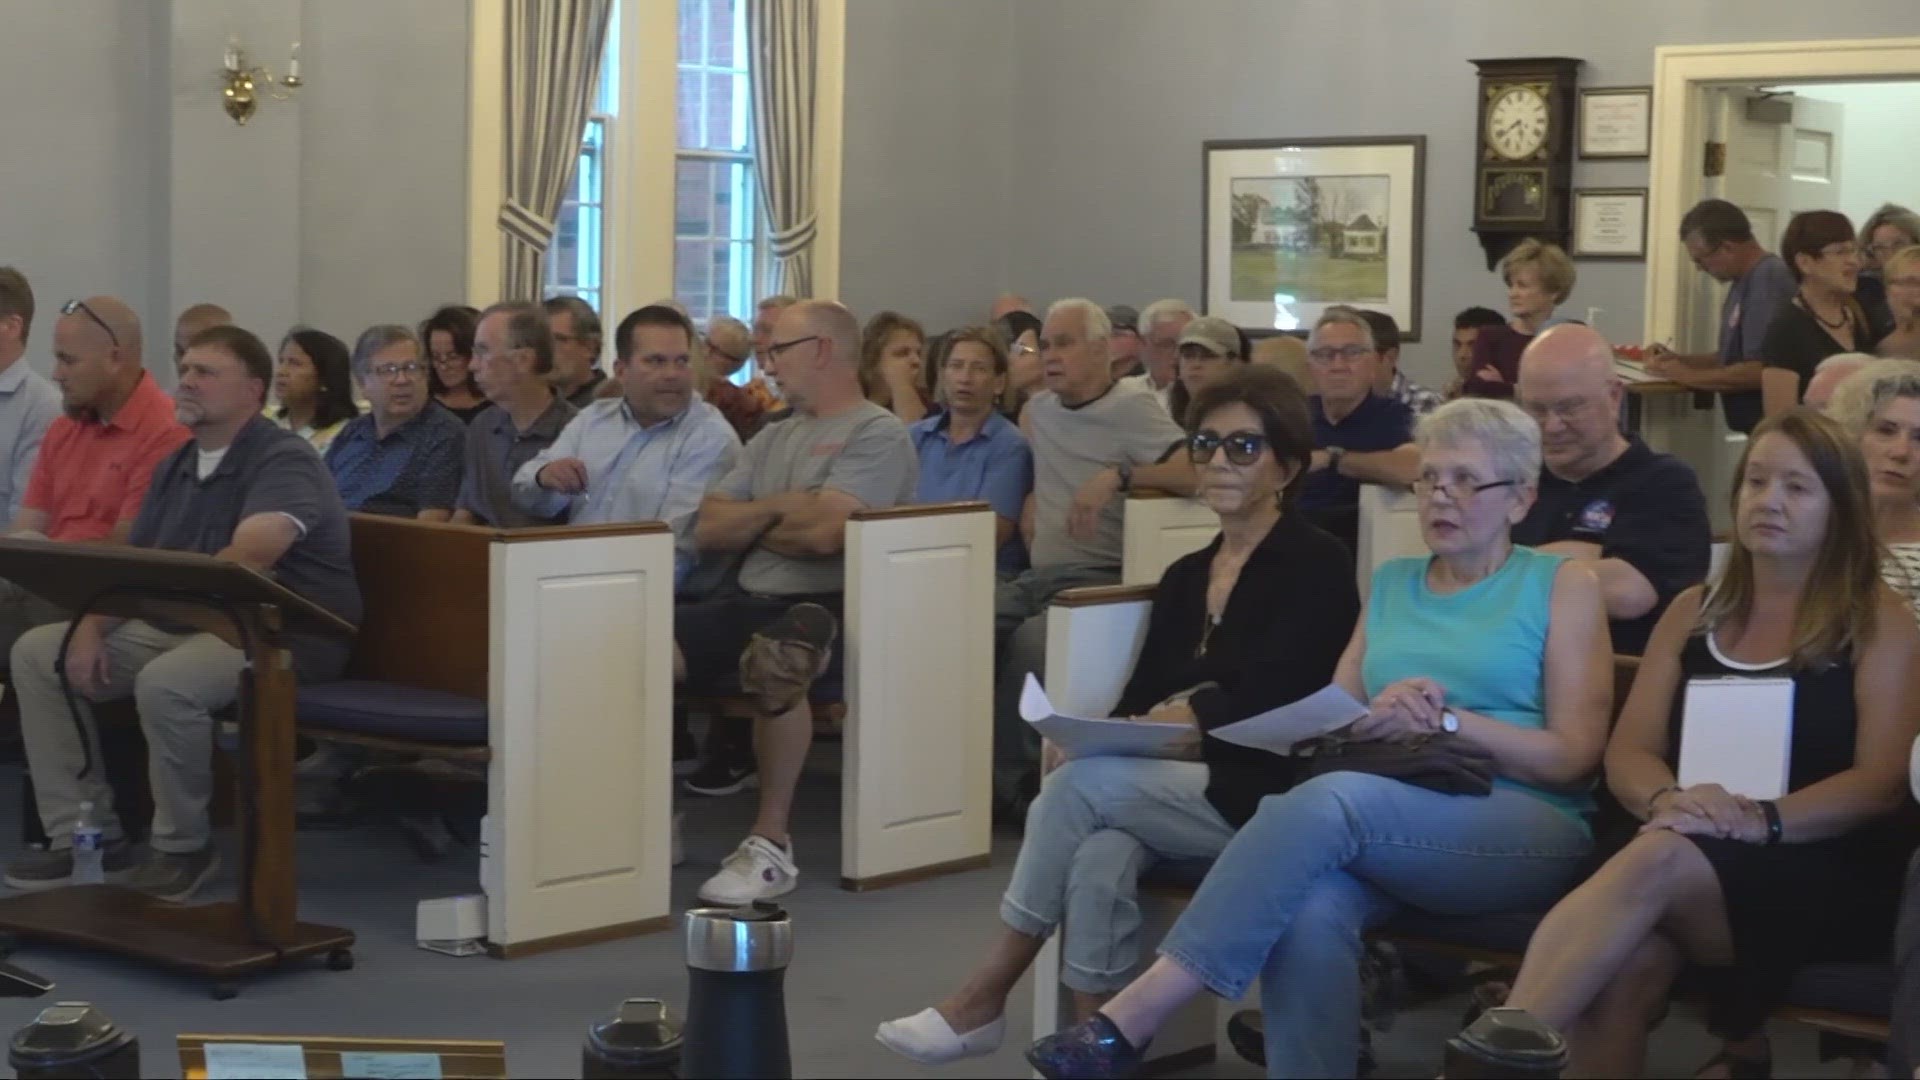 Dozens of concerned residents voiced their opinions during a heated special city council meeting on Thursday night.